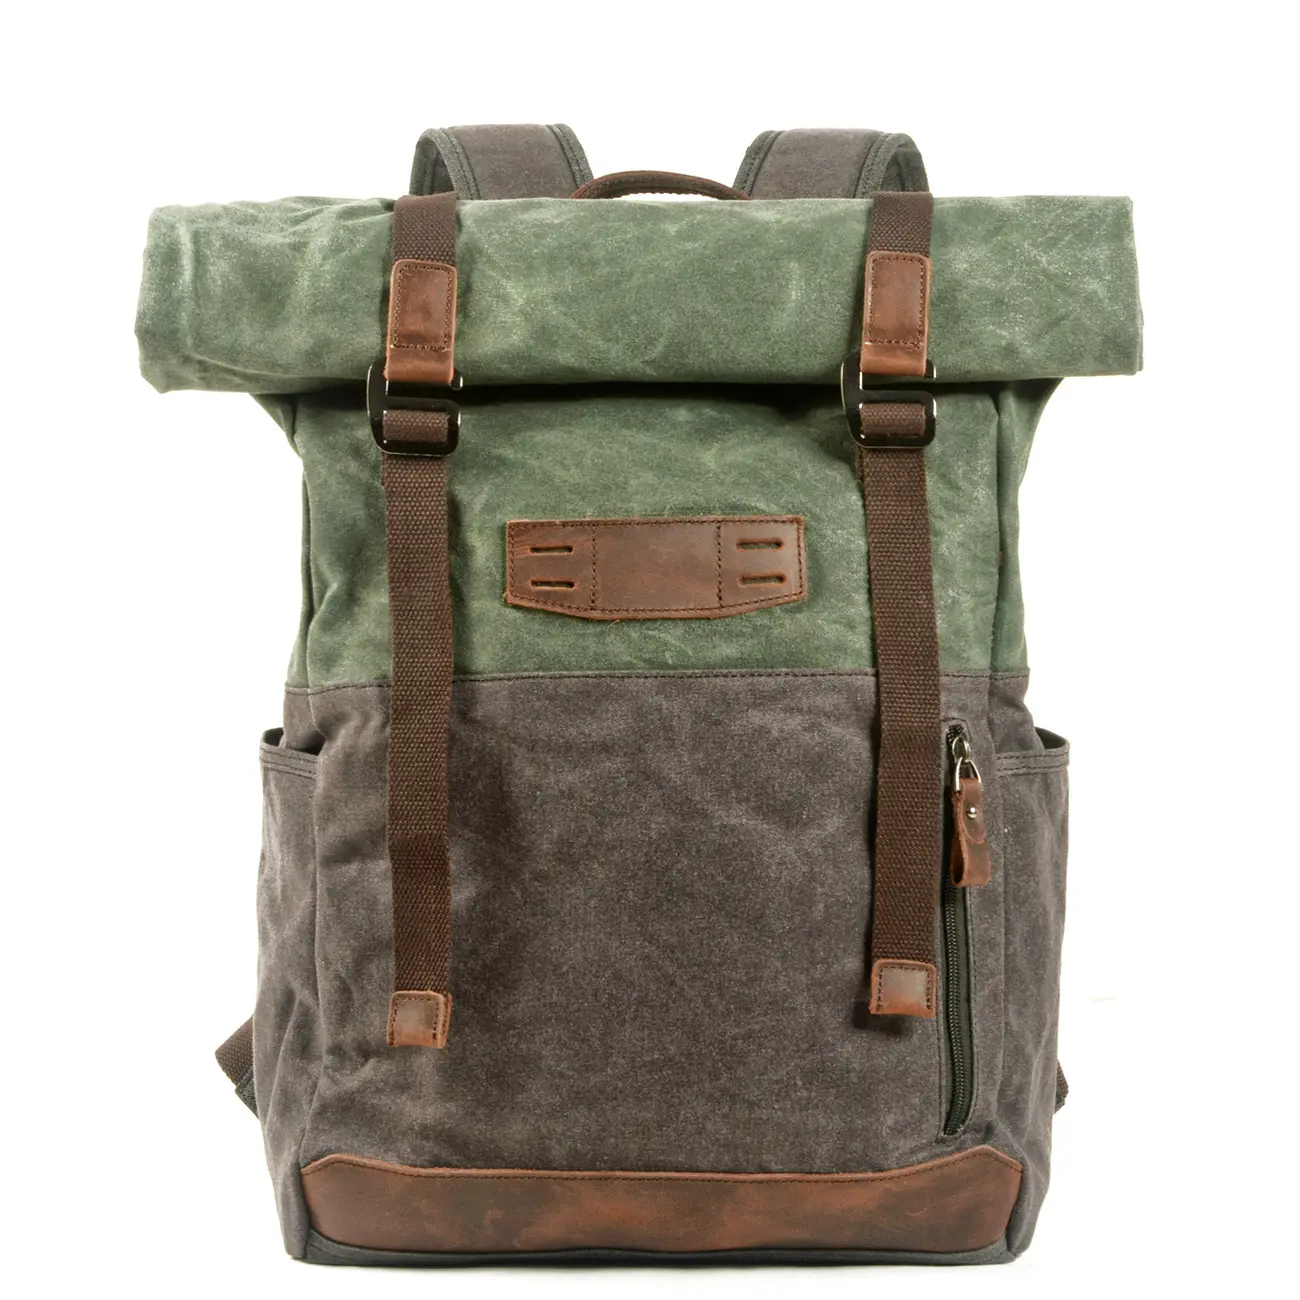 36-55L Oil Waxed Canvas Contrast Color Roll Top Waterproof Outdoor Hiking Rucksack Backpack